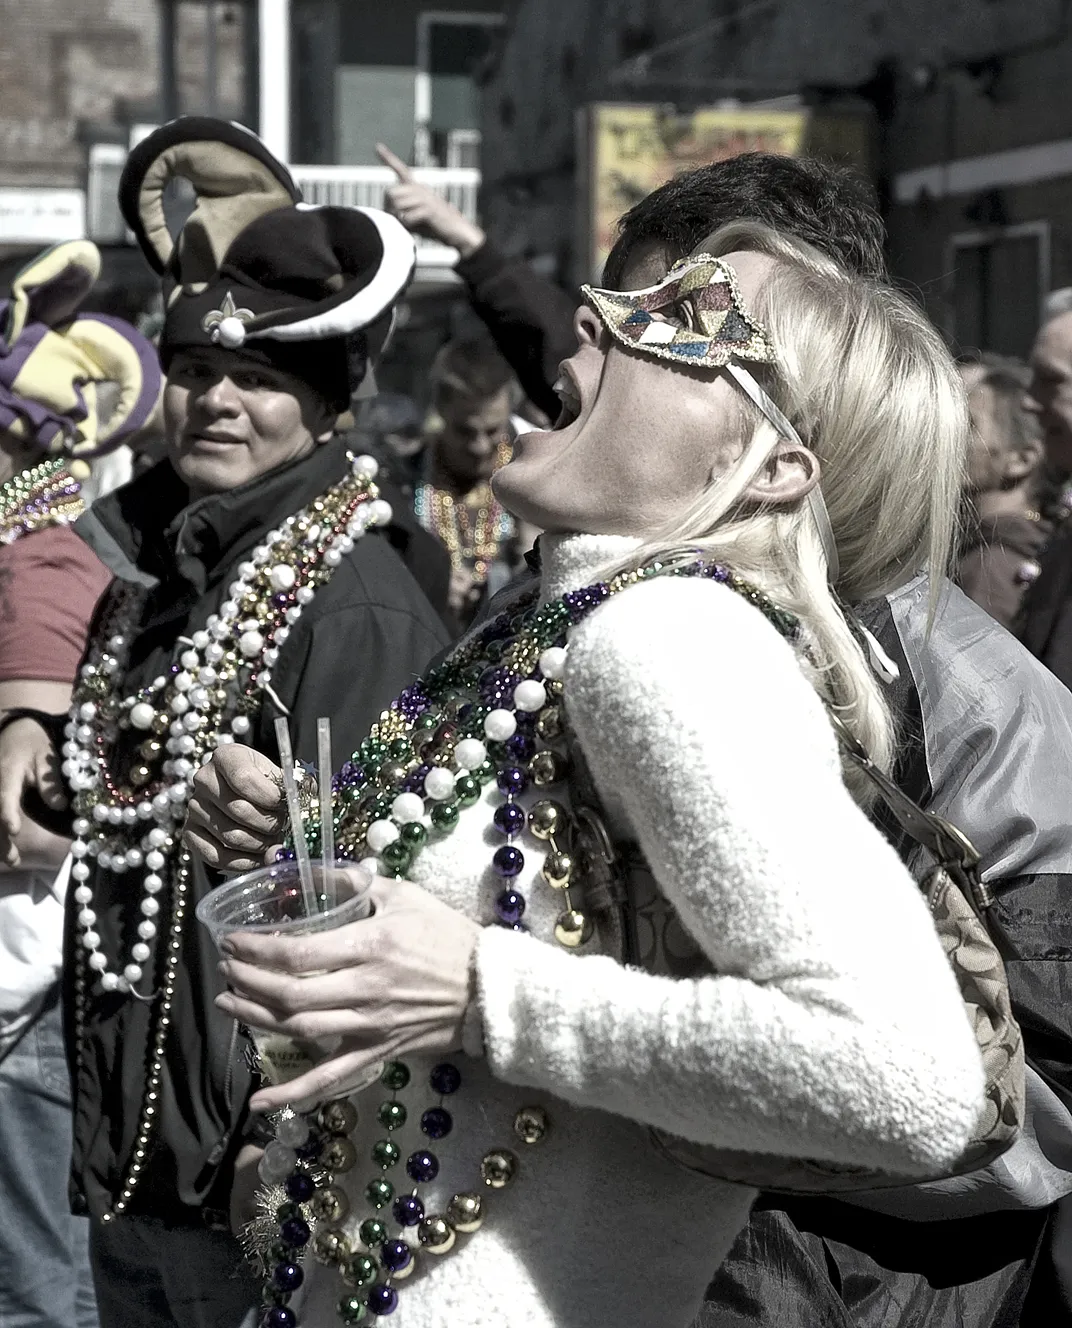 The Art Of Asking For Beads During Mardi Gras In New Orleans Smithsonian Photo Contest